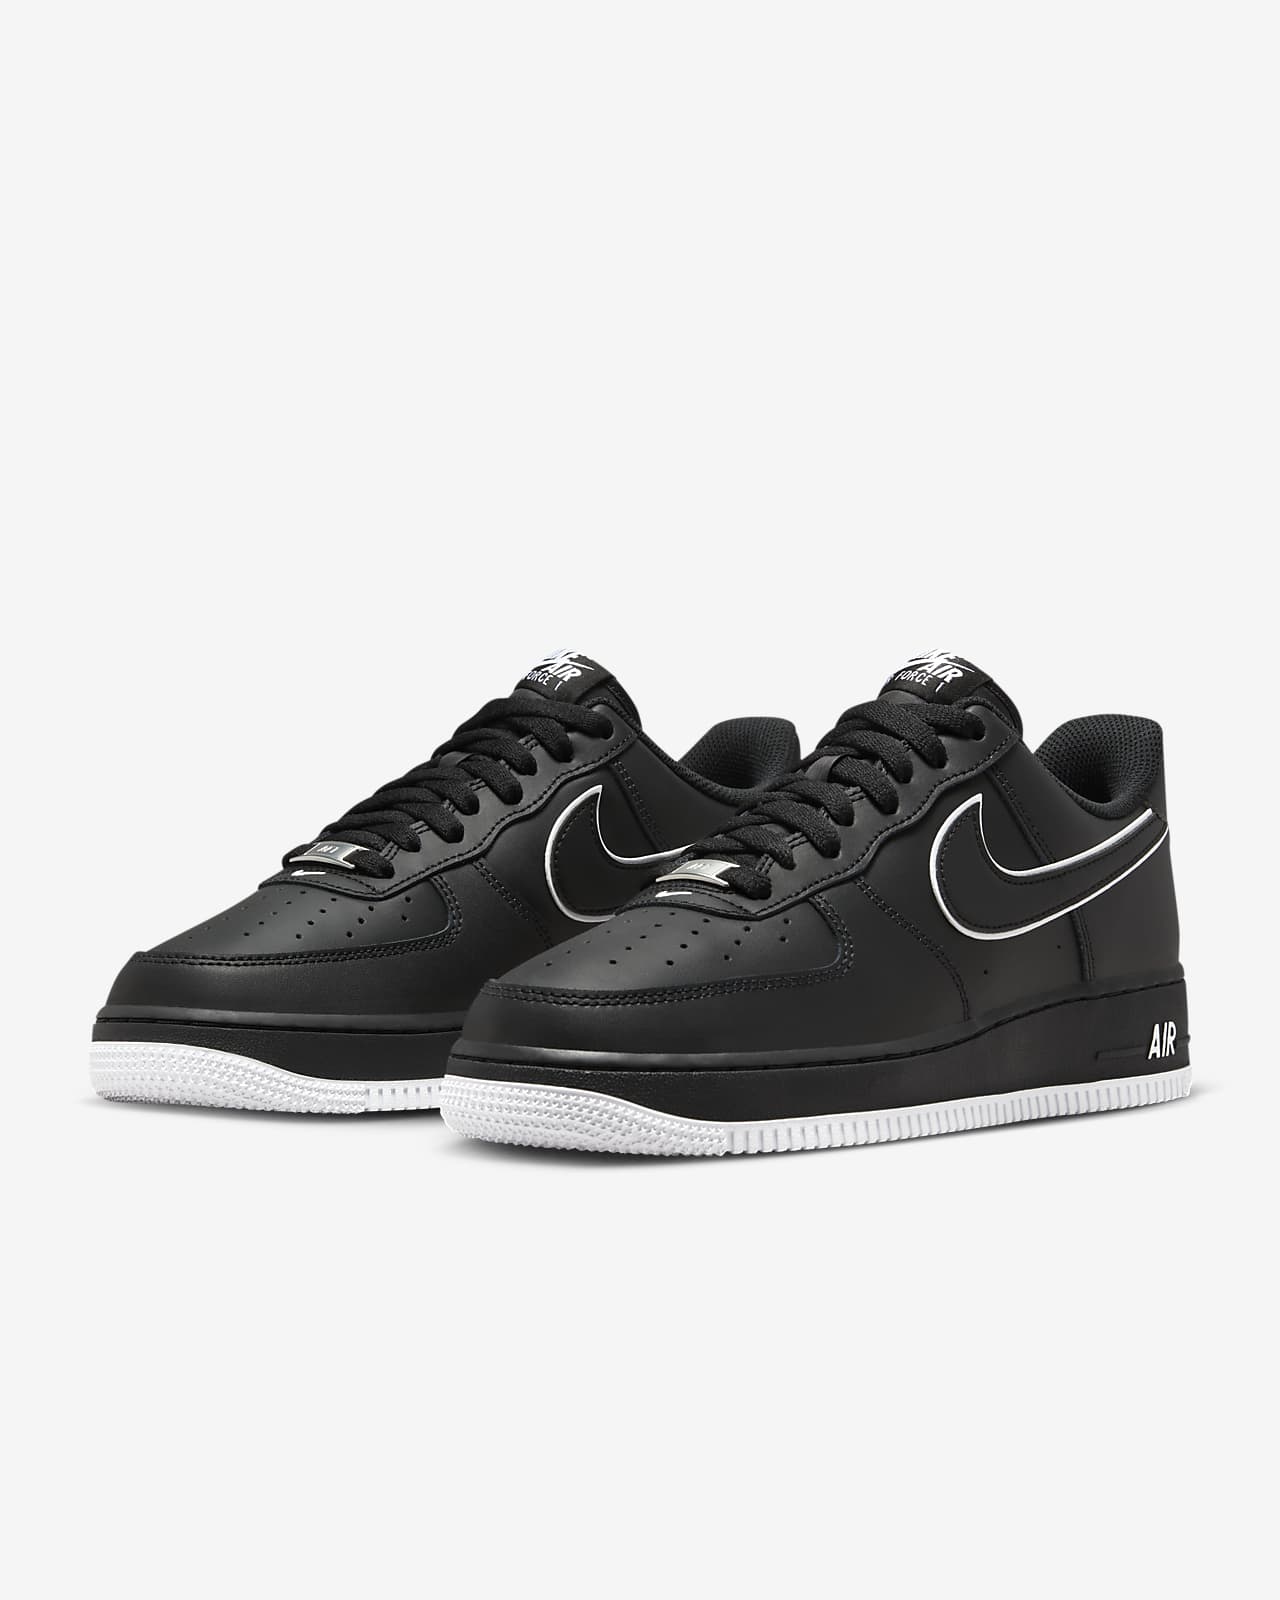 Nike Air Force 1 '07 Men's Shoes.